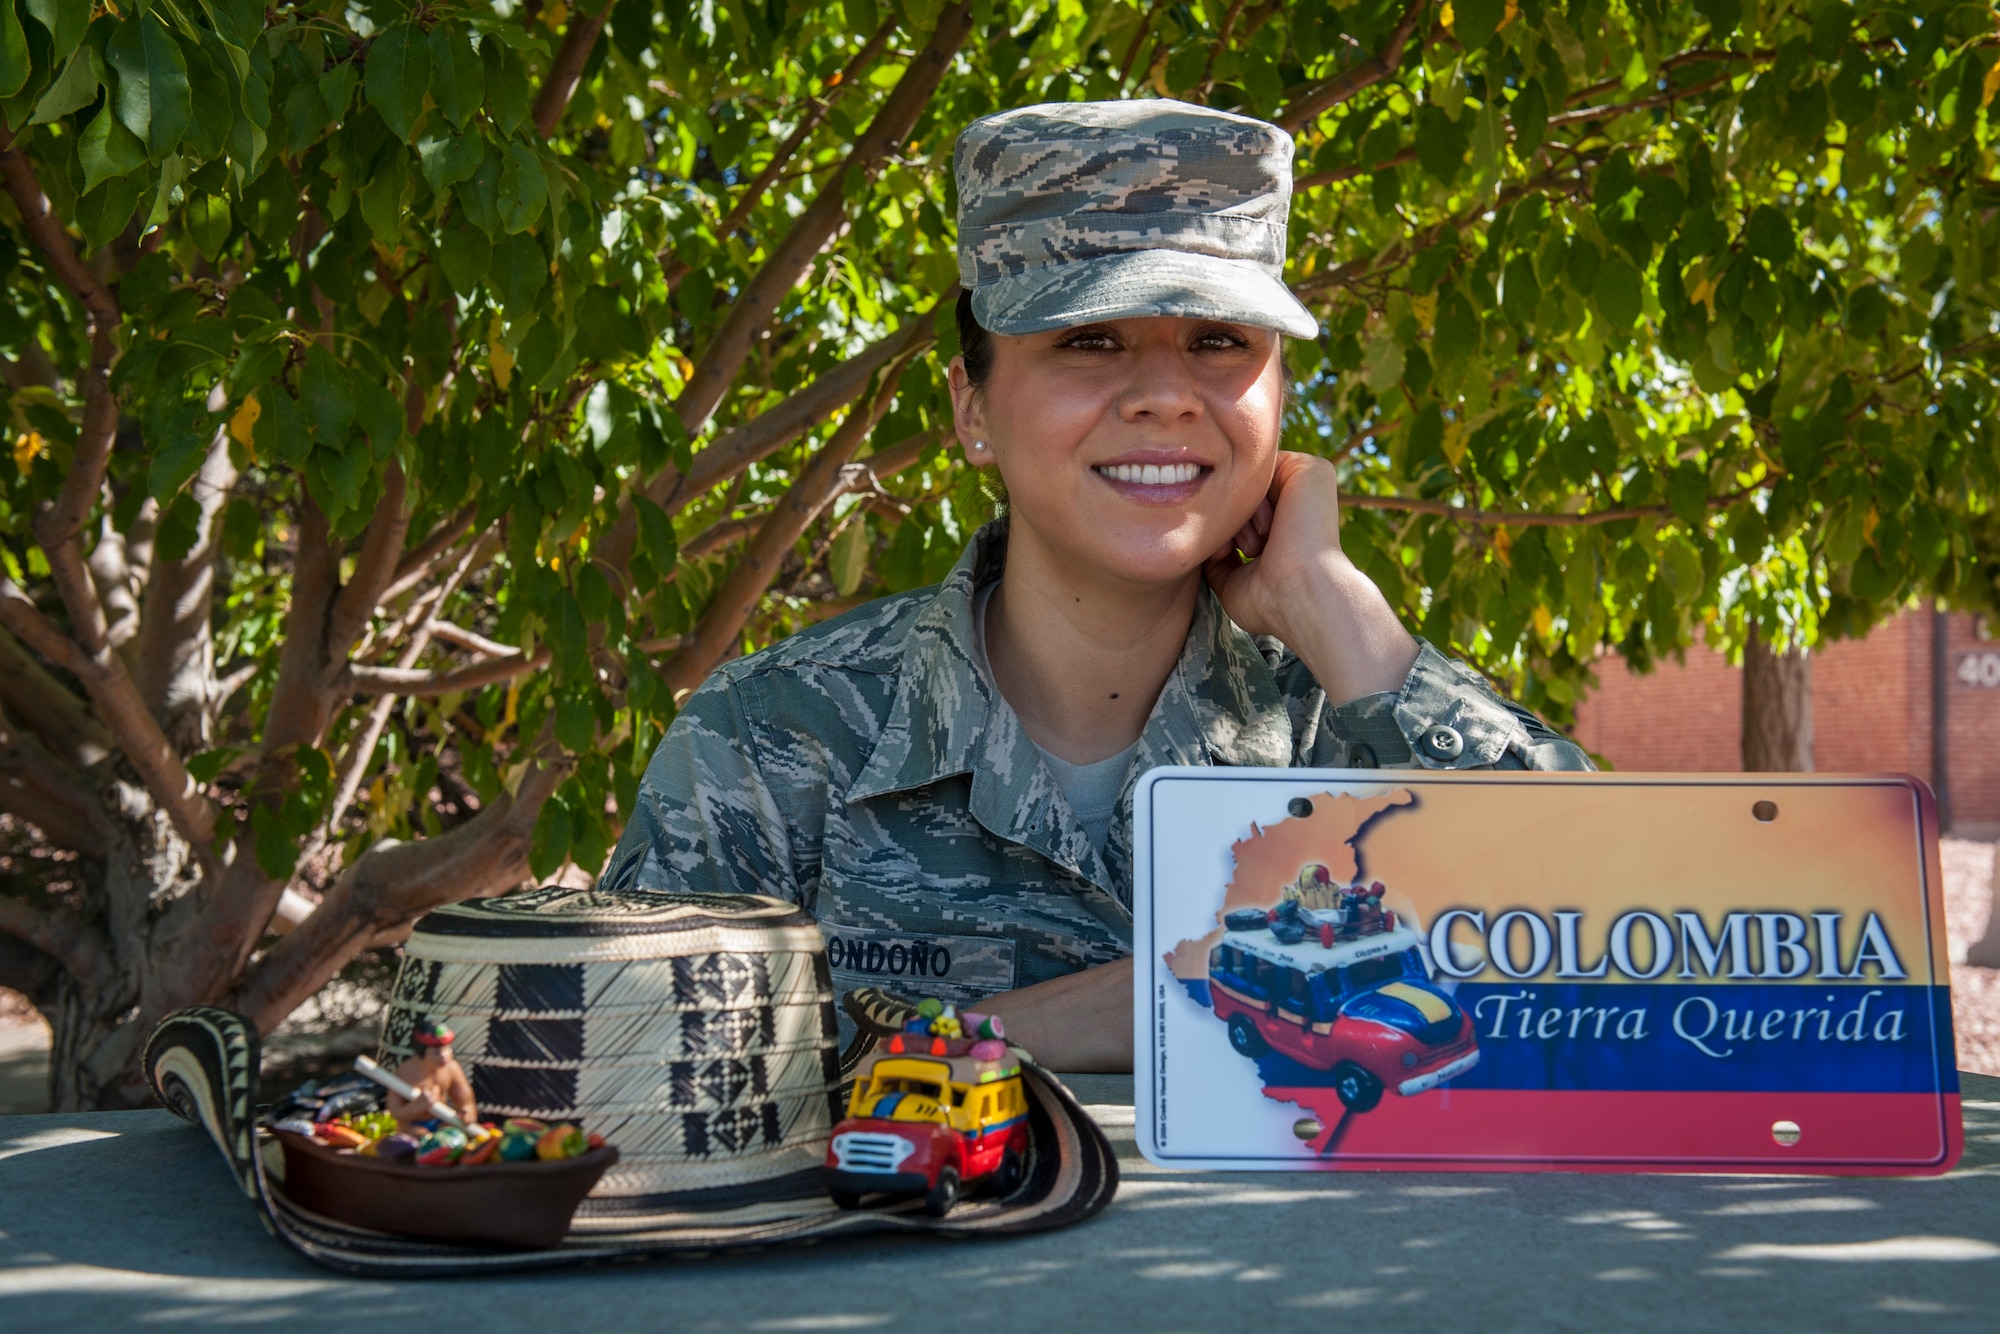 Senior Airman Andrea Londoño, who is assigned to the 4th Manpower Requirement Squadron command support staff, was born and raised in the Central Valley of California. Her mother is from Mexico and her father is from Colombia. Londoño is proud to continue her family heritage and military legacy in the Air Force. (U.S. Air Force photo/Airman 1st Class Rose Gudex)